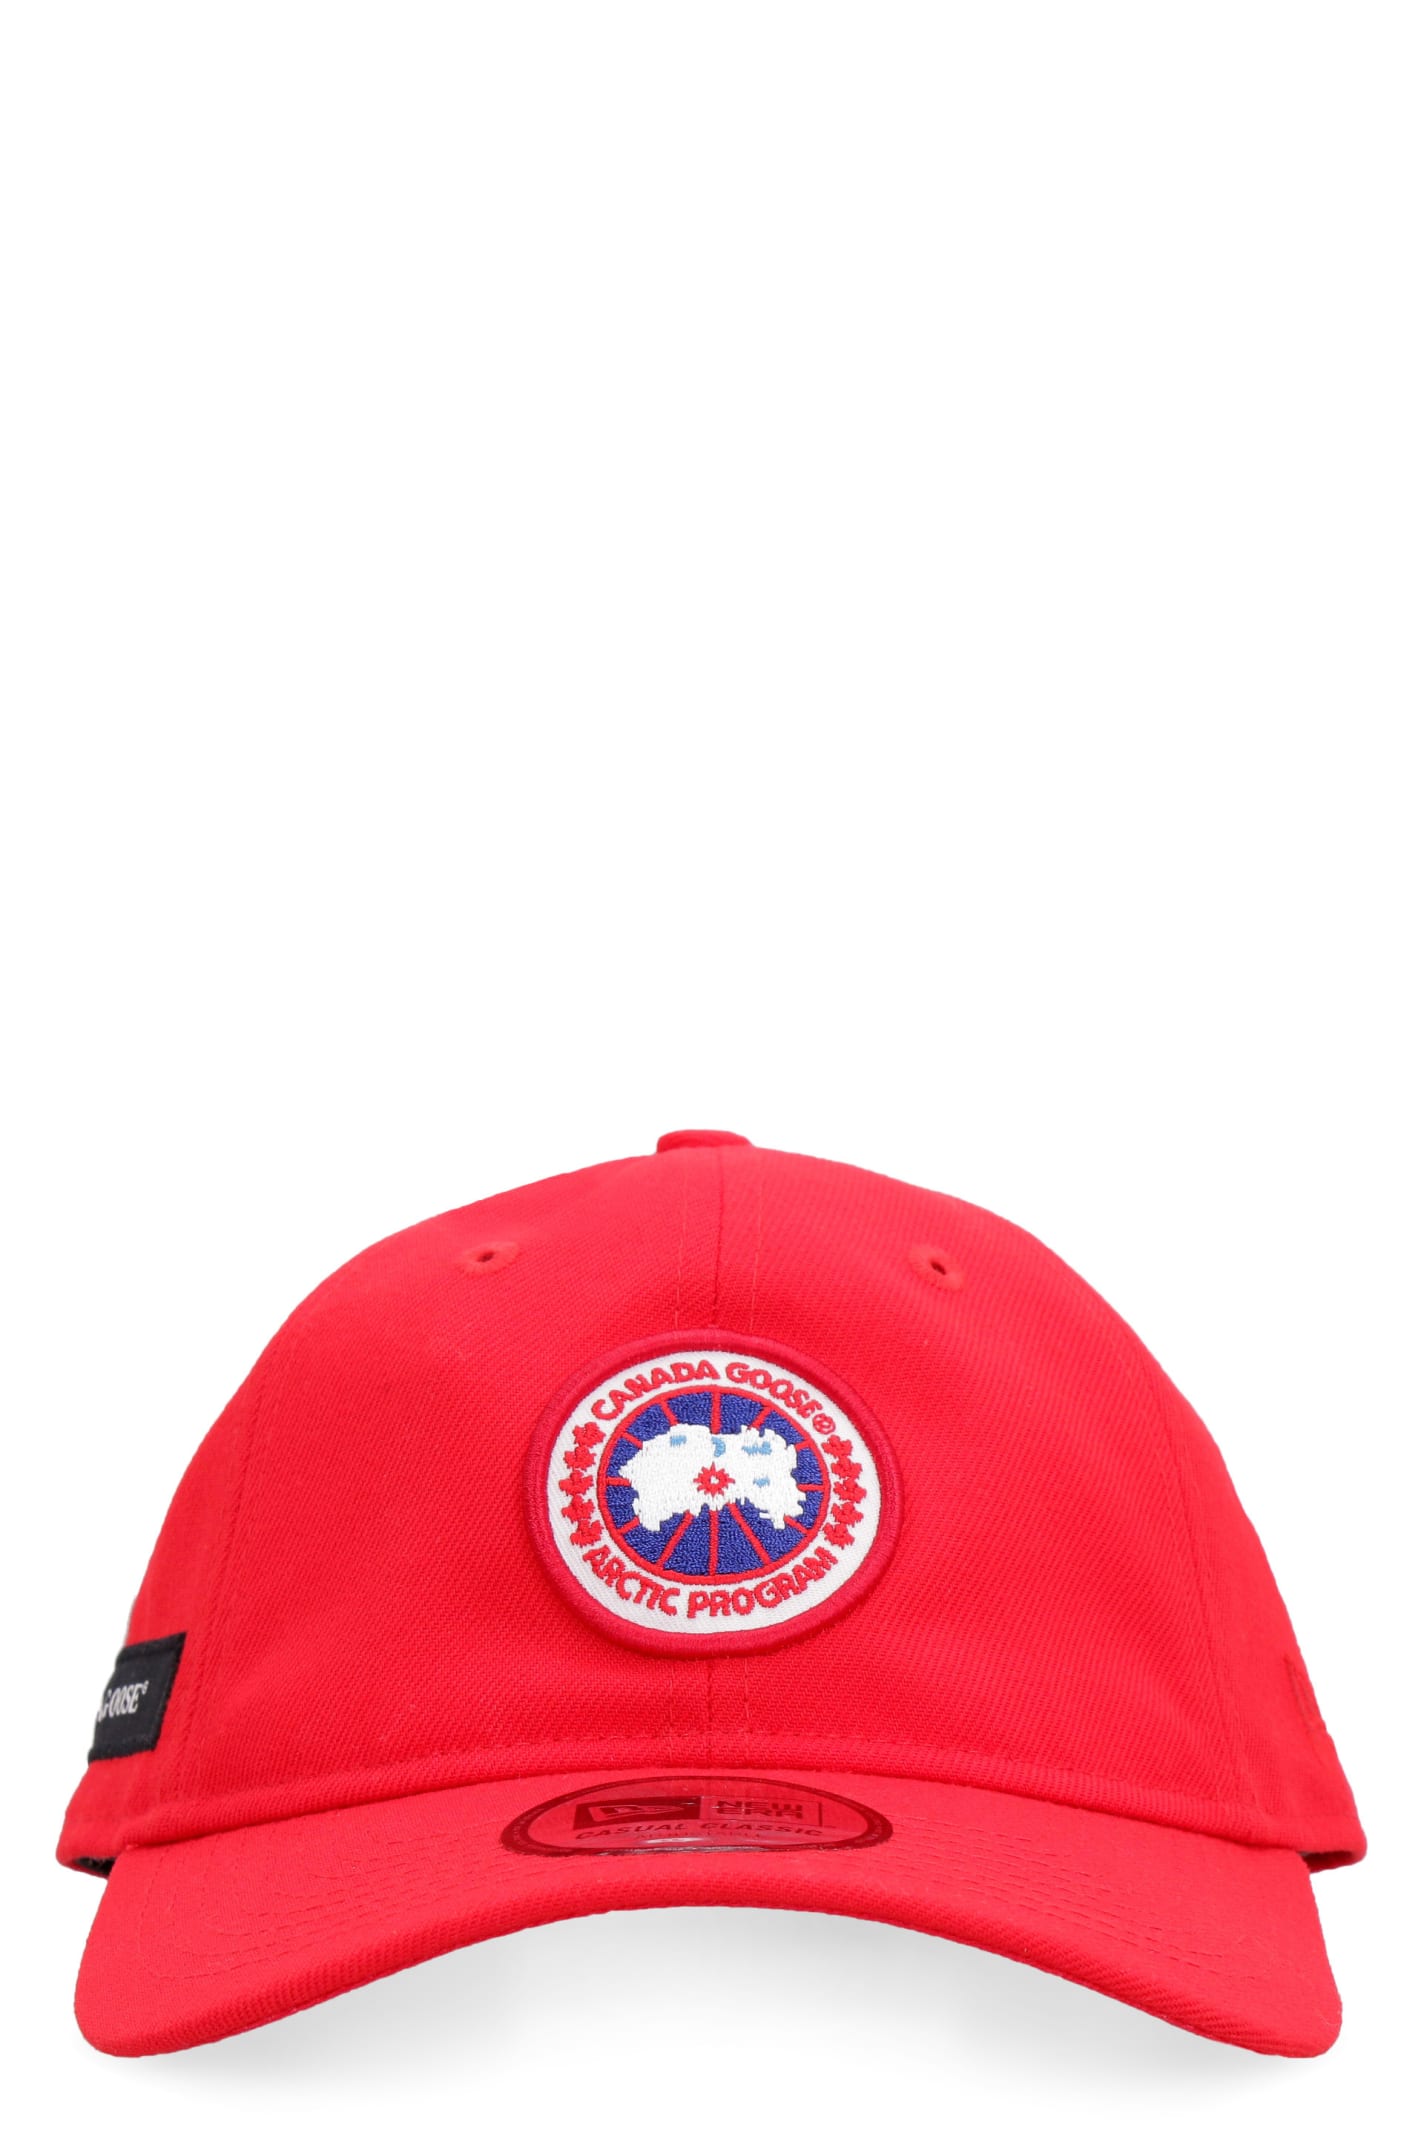 Canada Goose Embroidered Patch Baseball Cap